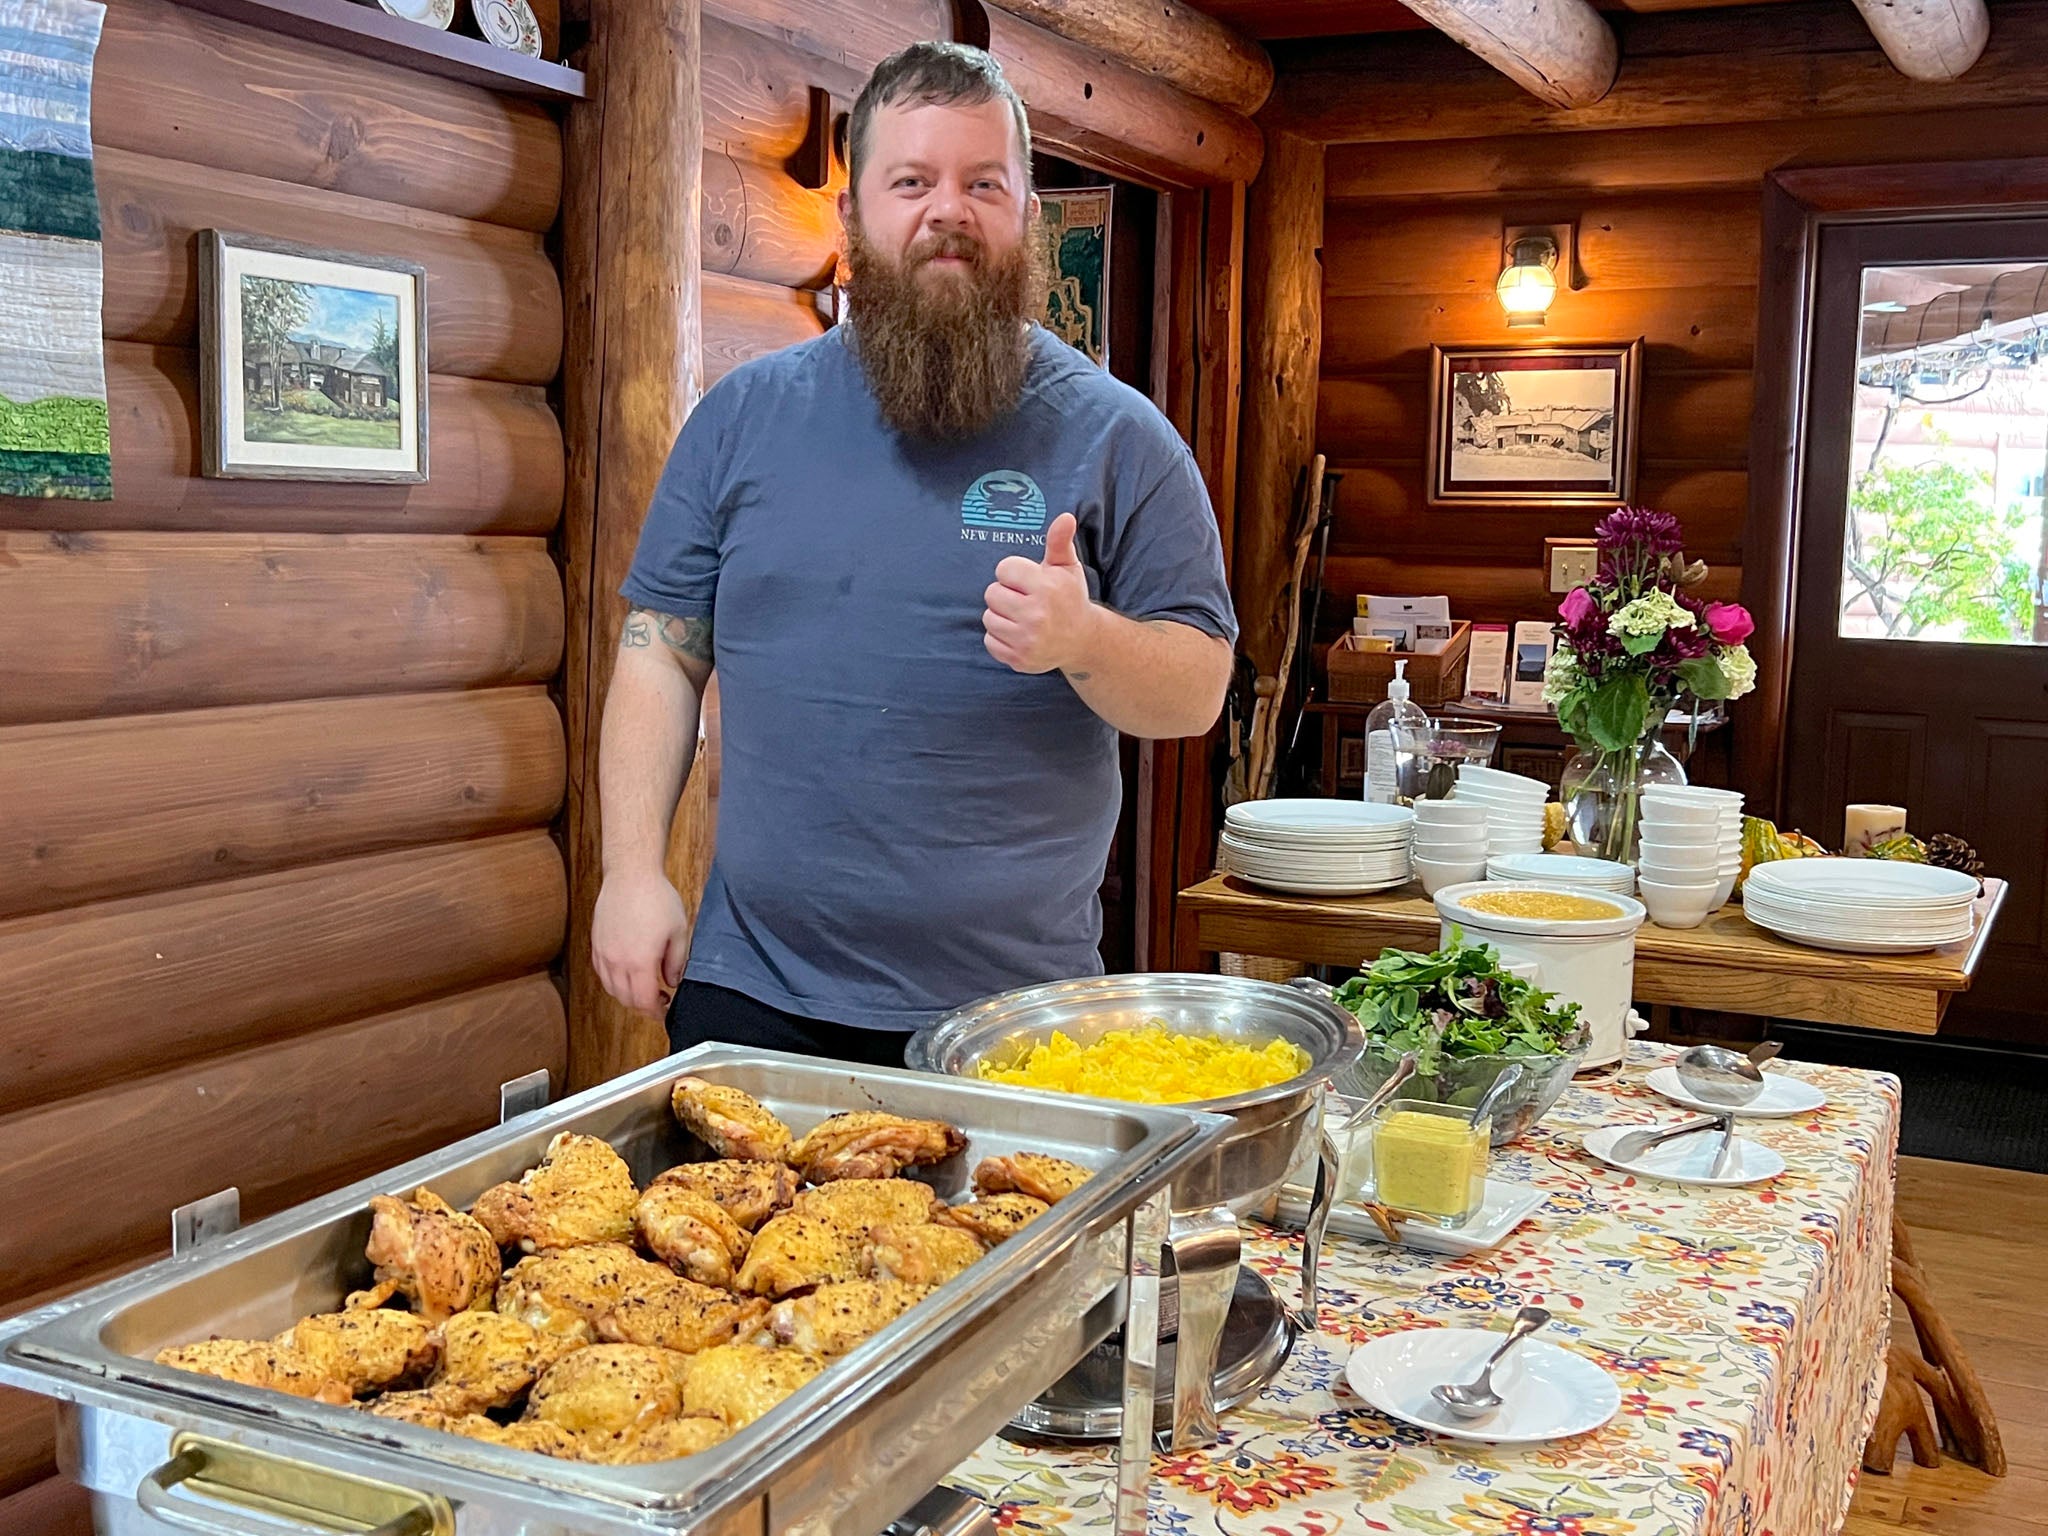 Chef Cody prepares meals for the Okan Arts Crazy About Curves Retreat, November 2022